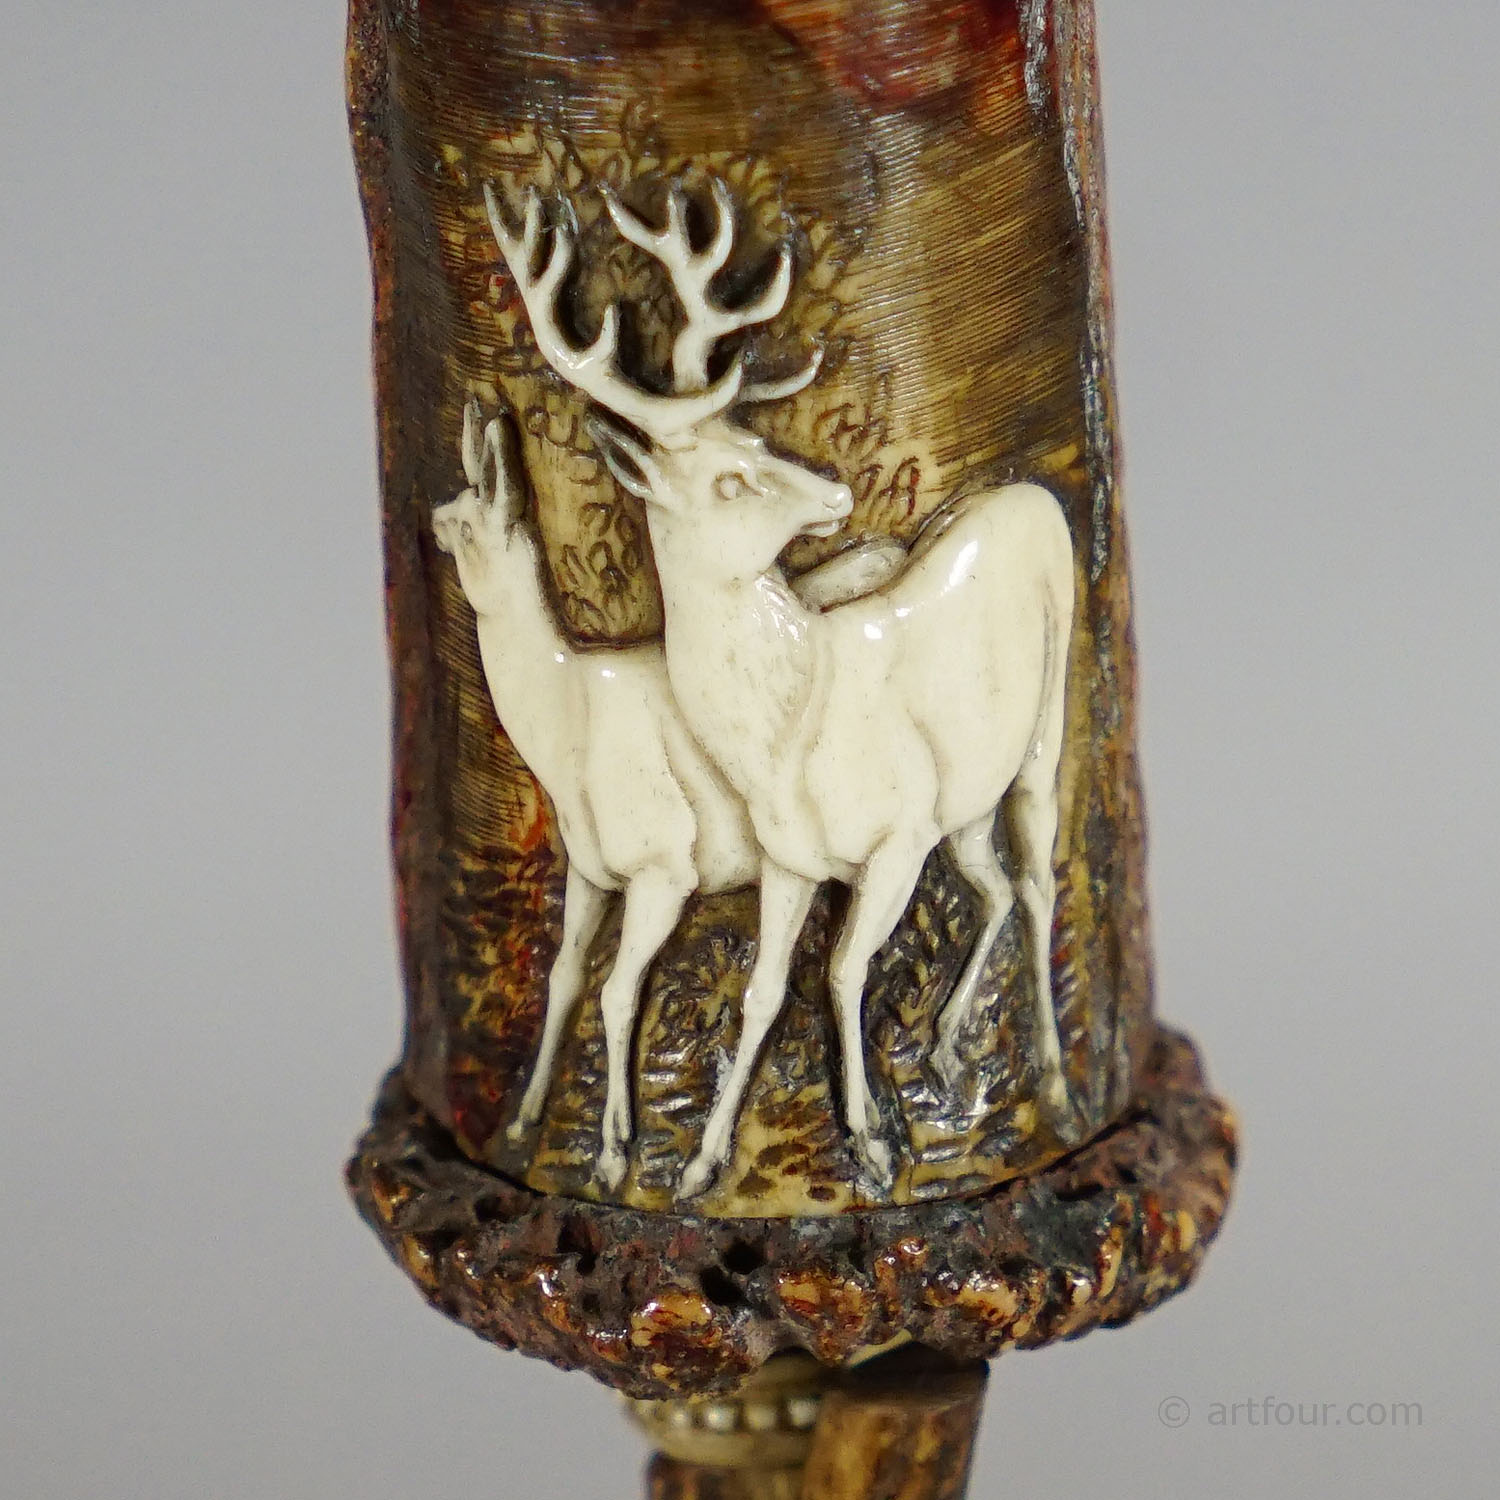 Stylish Cabin Decor Antler Candle Holder with Deer Carving, Germany ca. 1900